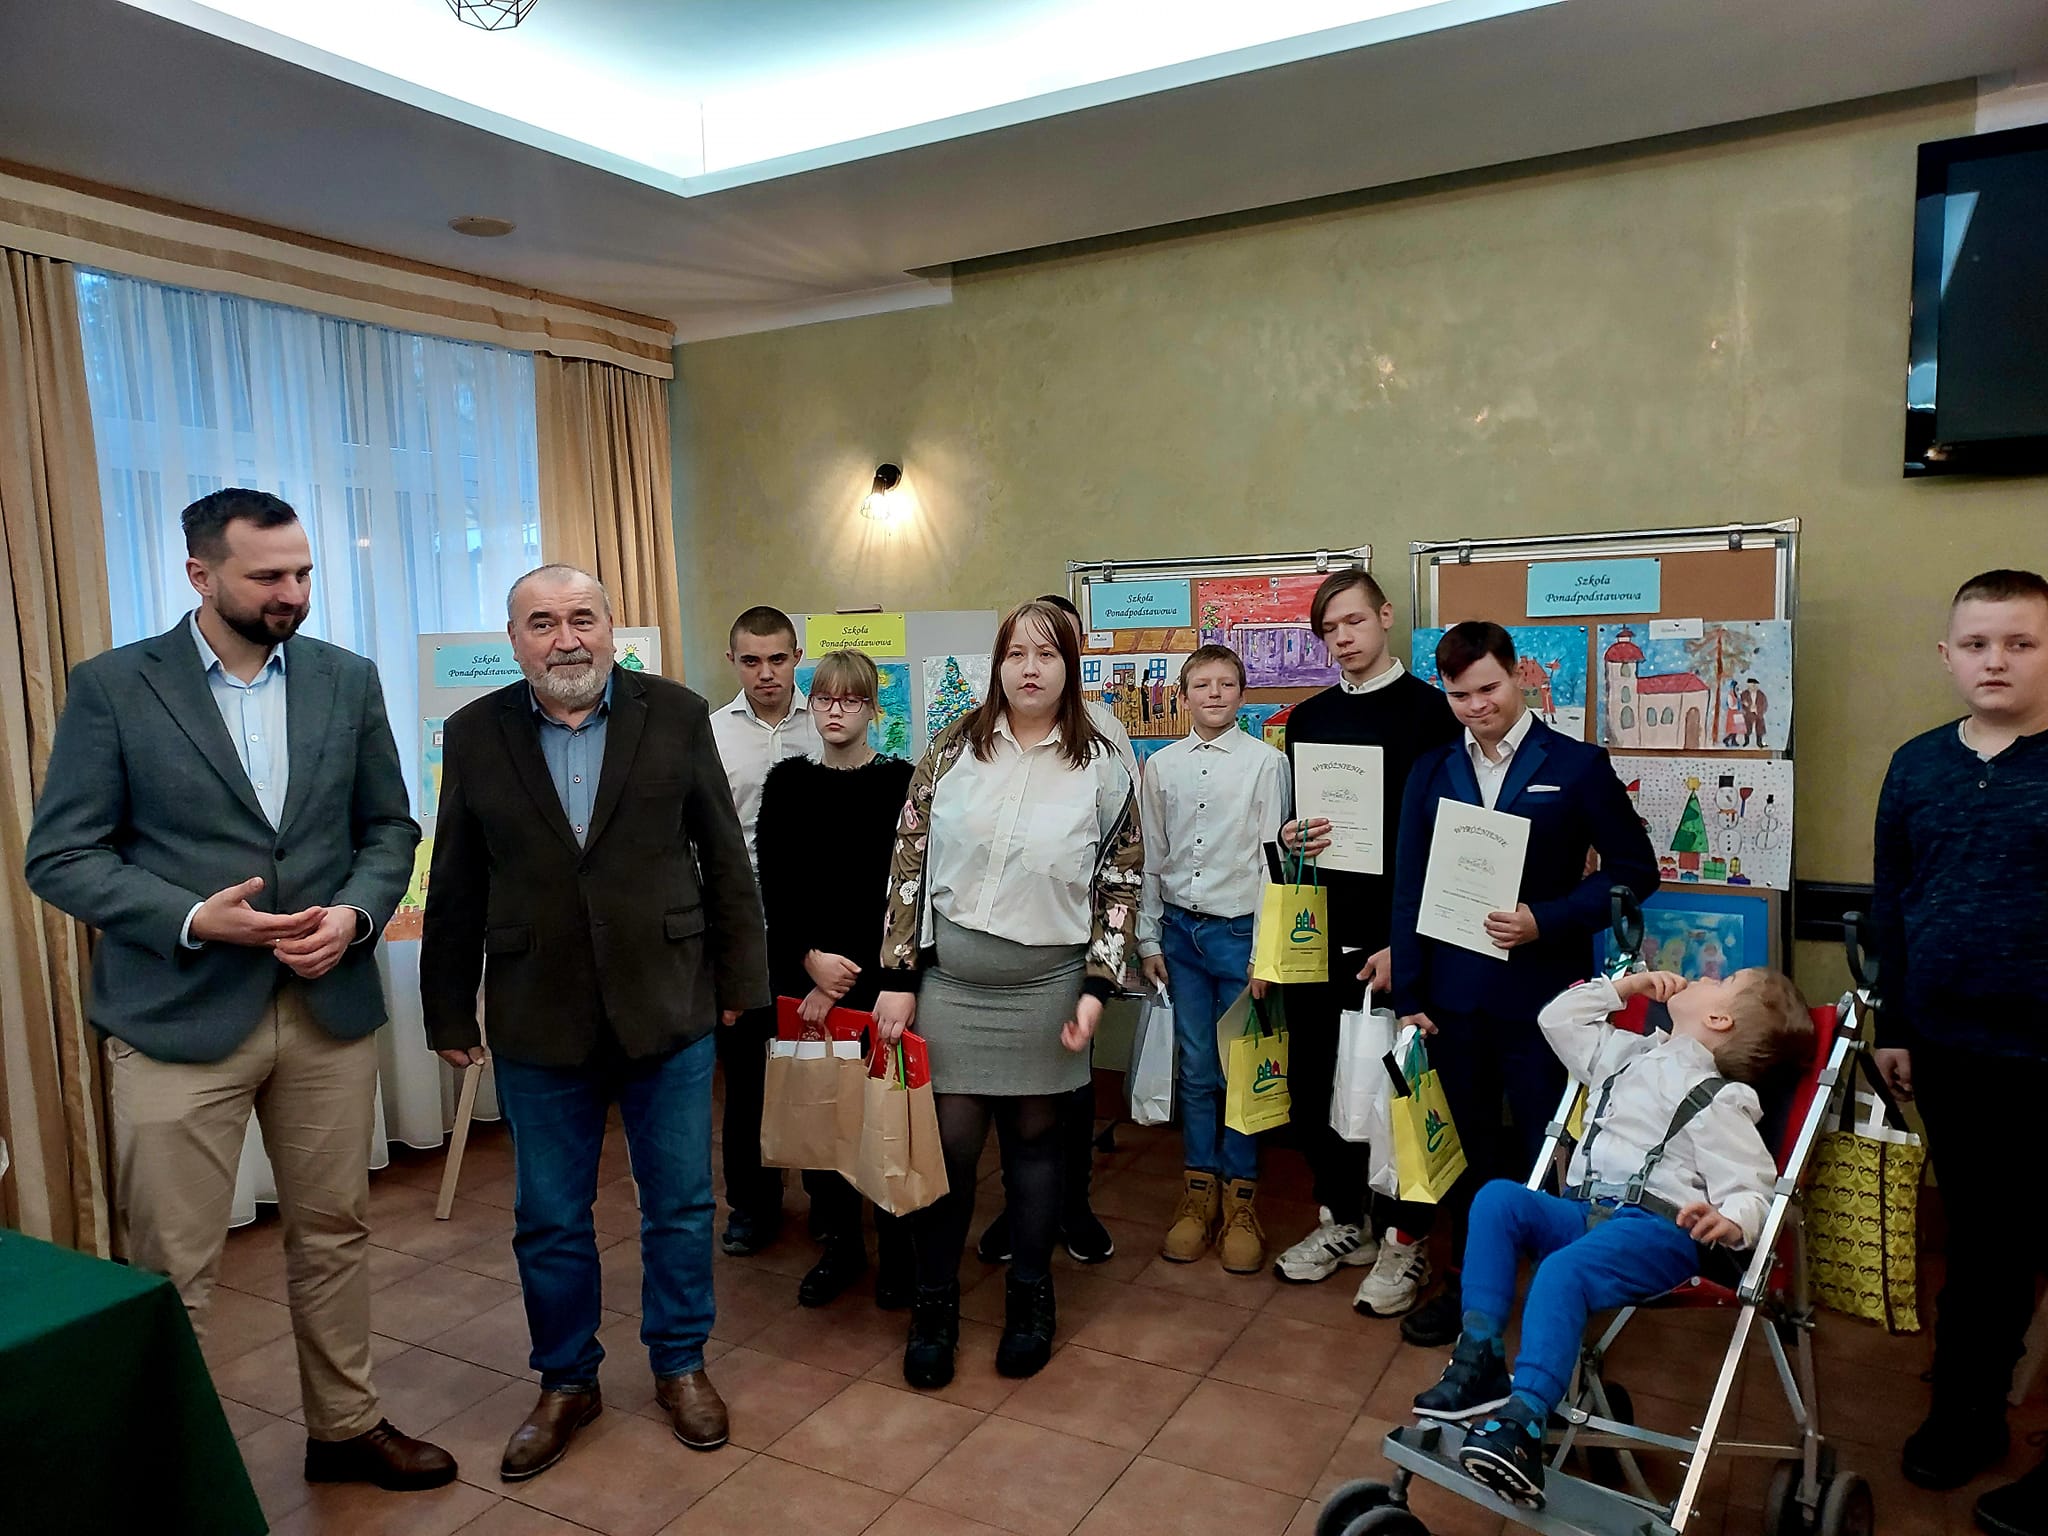   Wards of the K. Makuszynski Special School and Educational Center in Olsztyn with prizes received for distinguished works in the art contest 